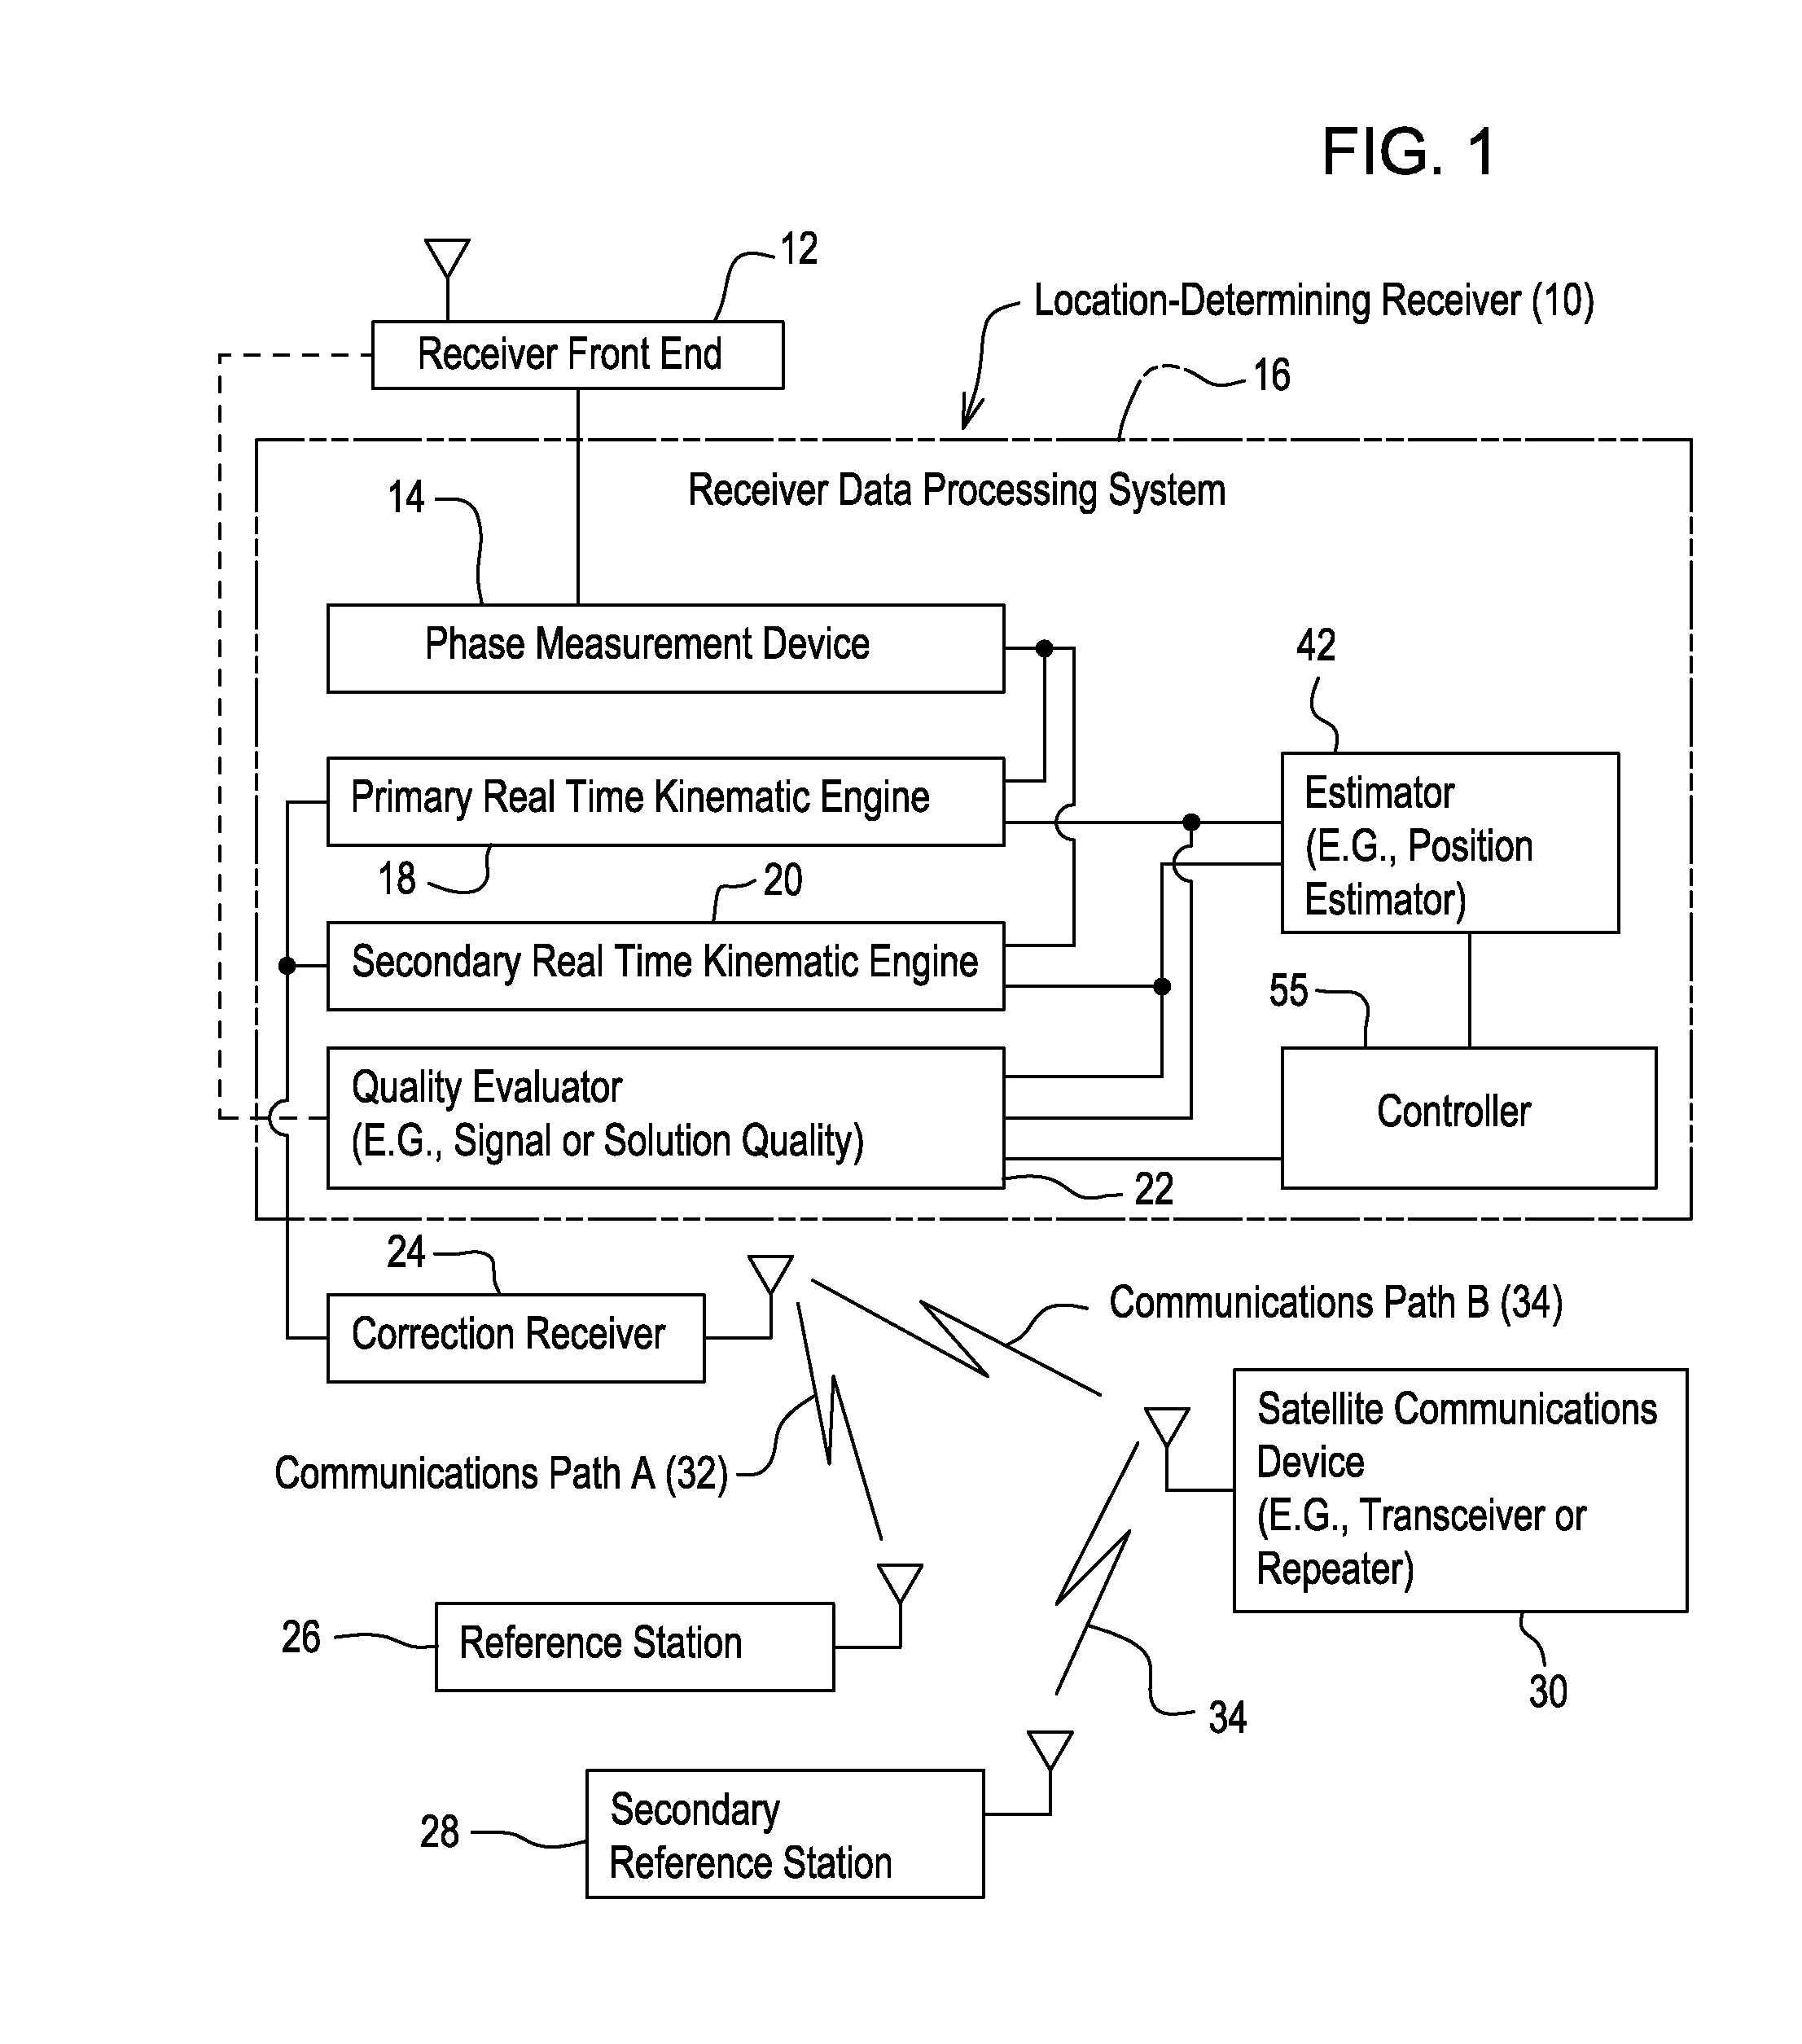 Method and system for estimating position using dual real time kinematic engines